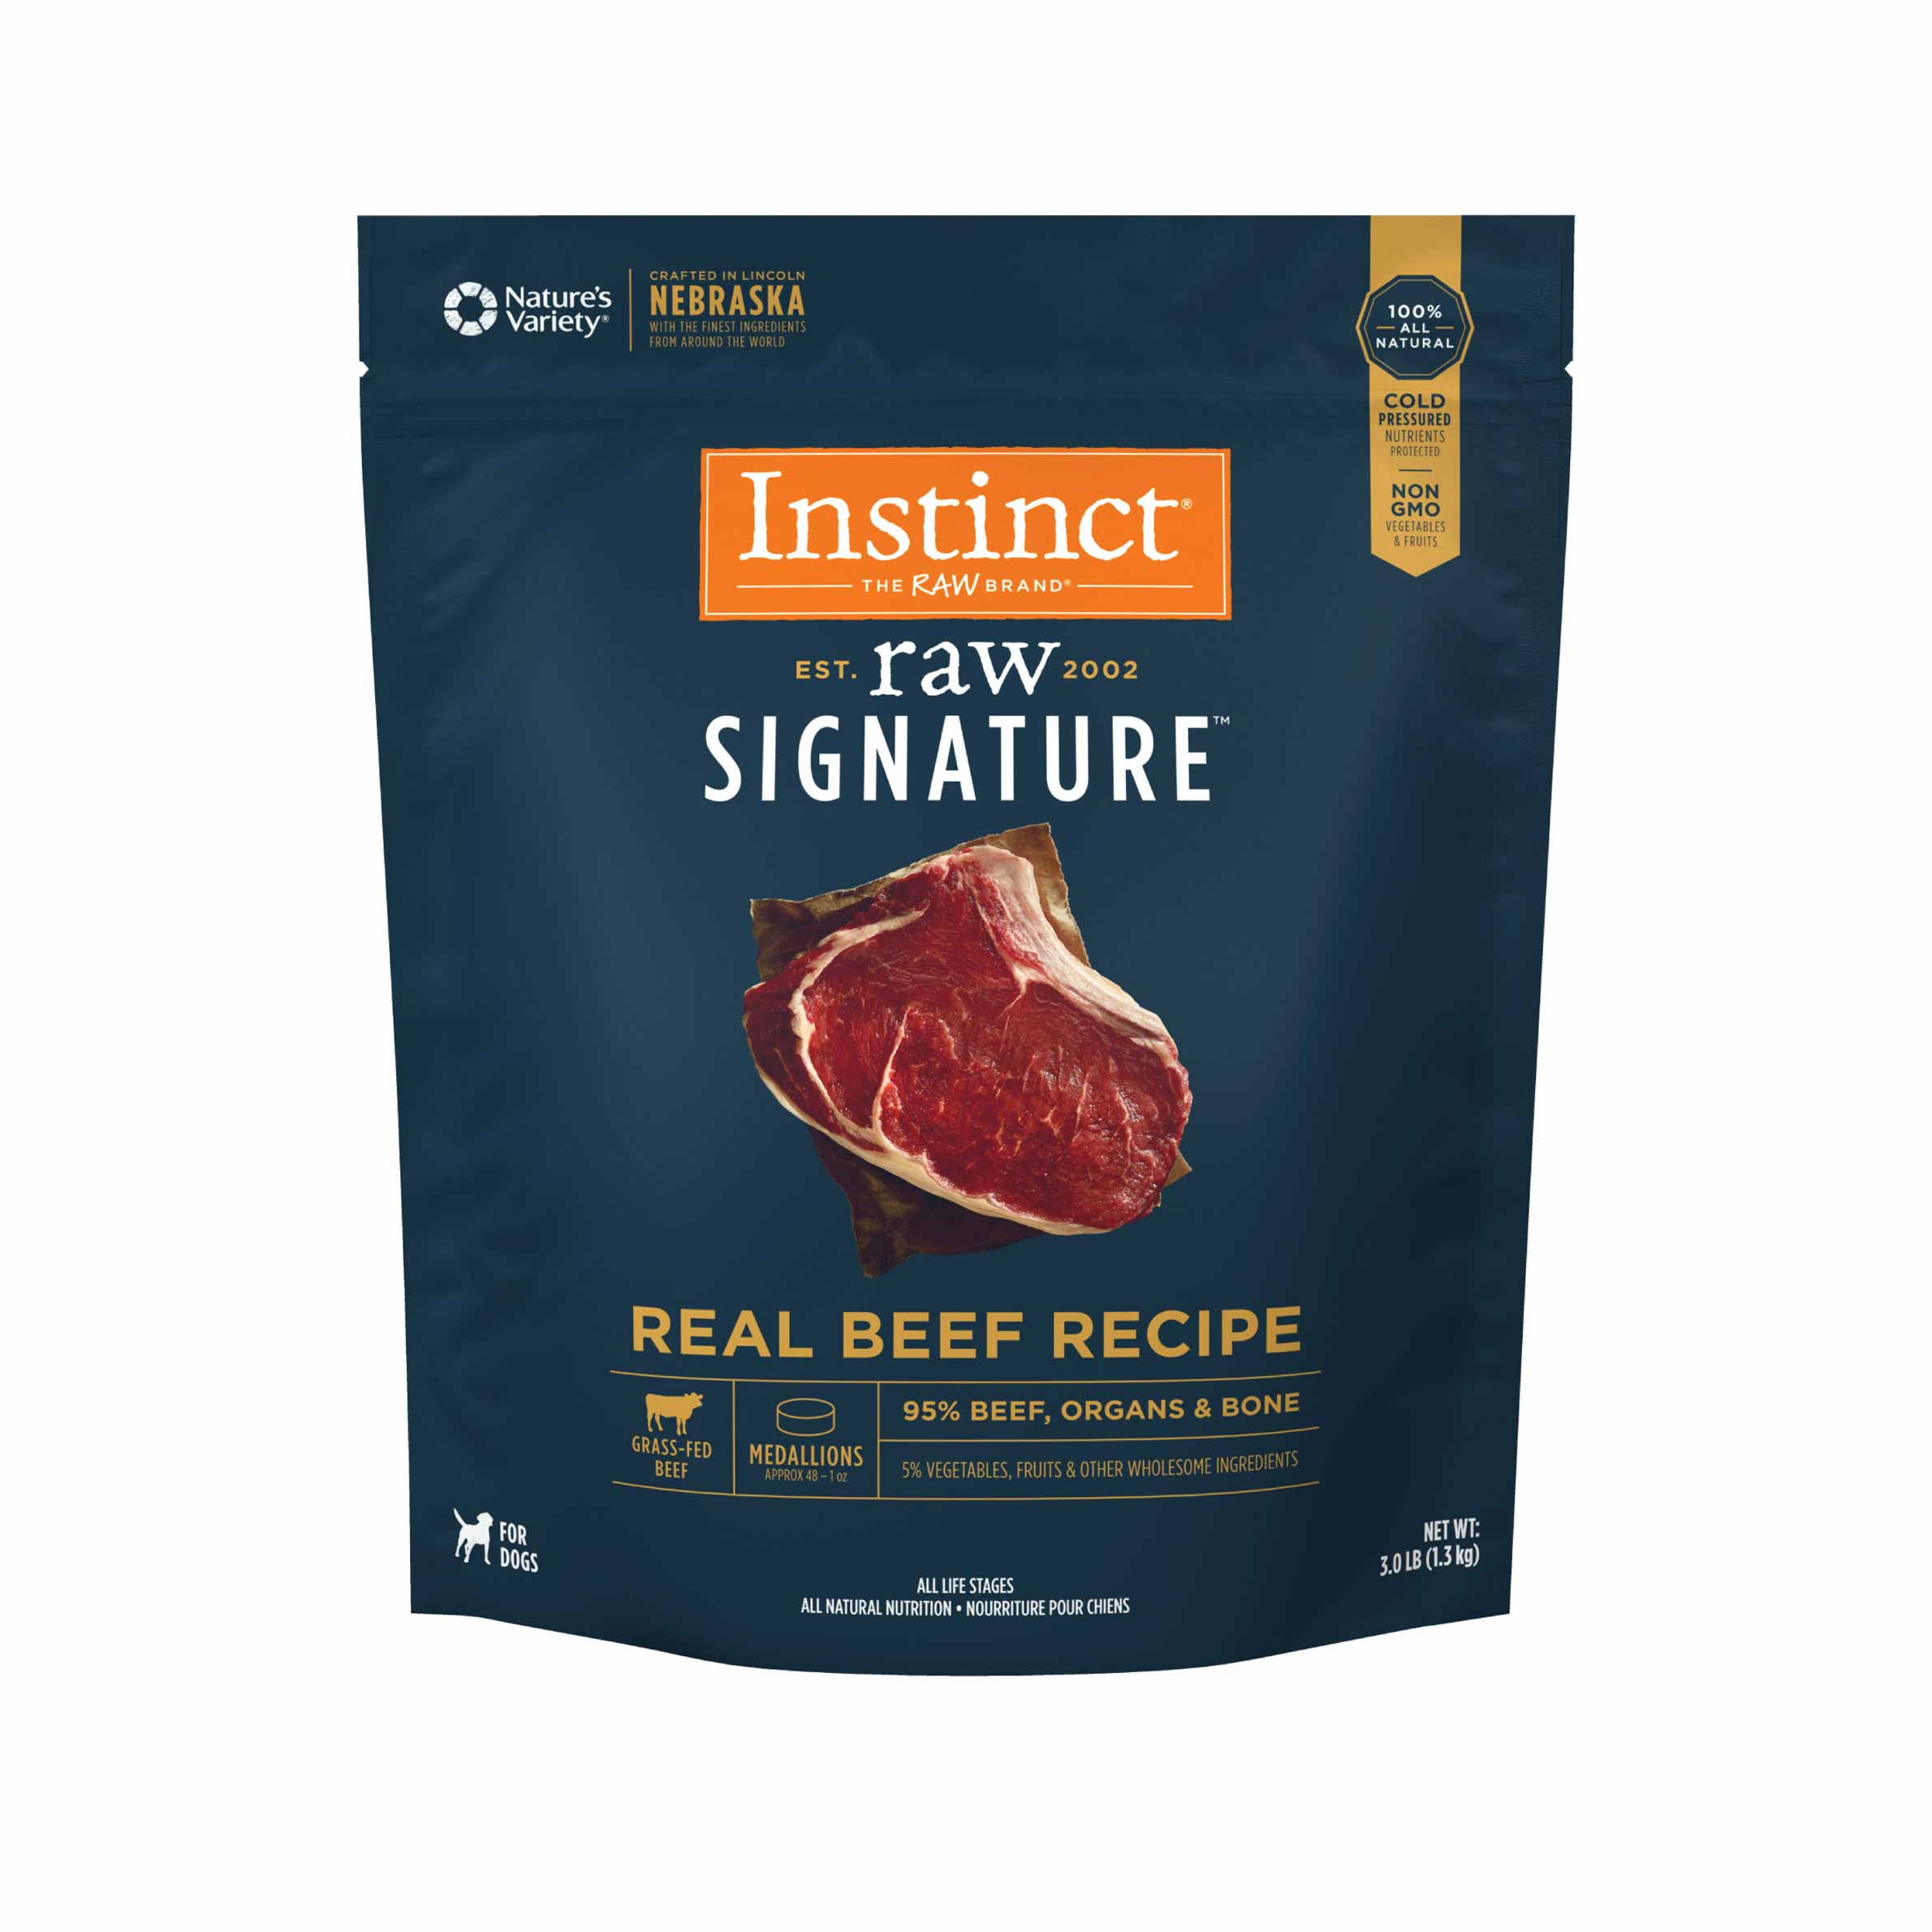 Instinct Frozen Raw Signature Medallions Grain-Free Real Beef Recipe Dog Food, 3 Pound Bag - Not Available for Delivery